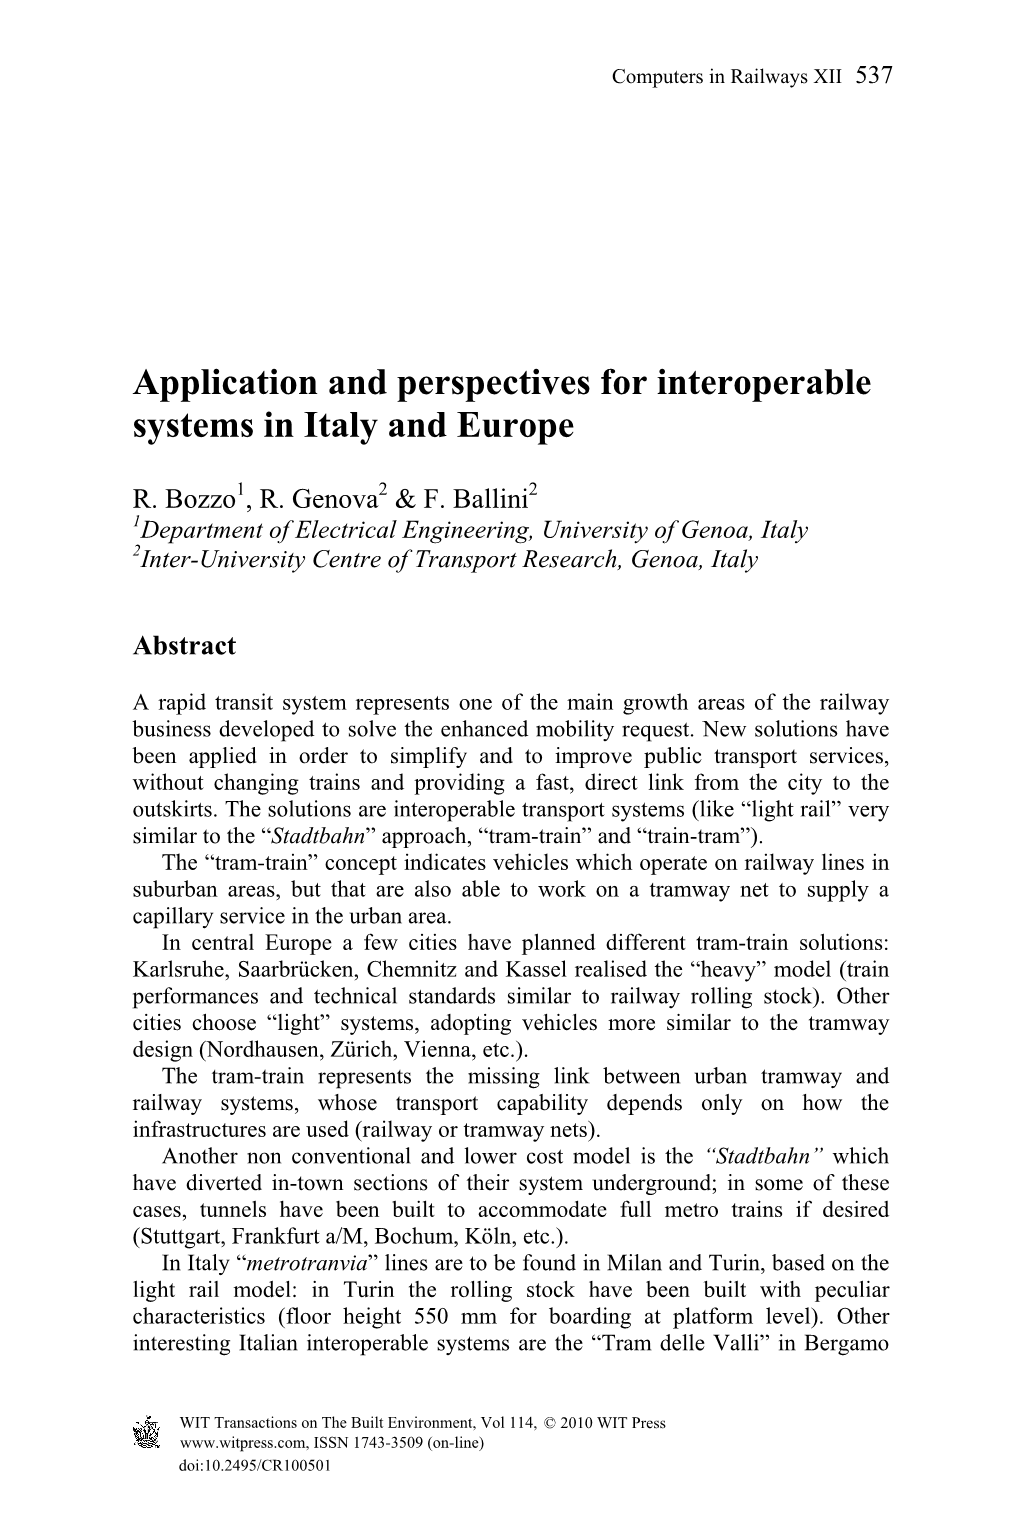 Application and Perspectives for Interoperable Systems in Italy and Europe